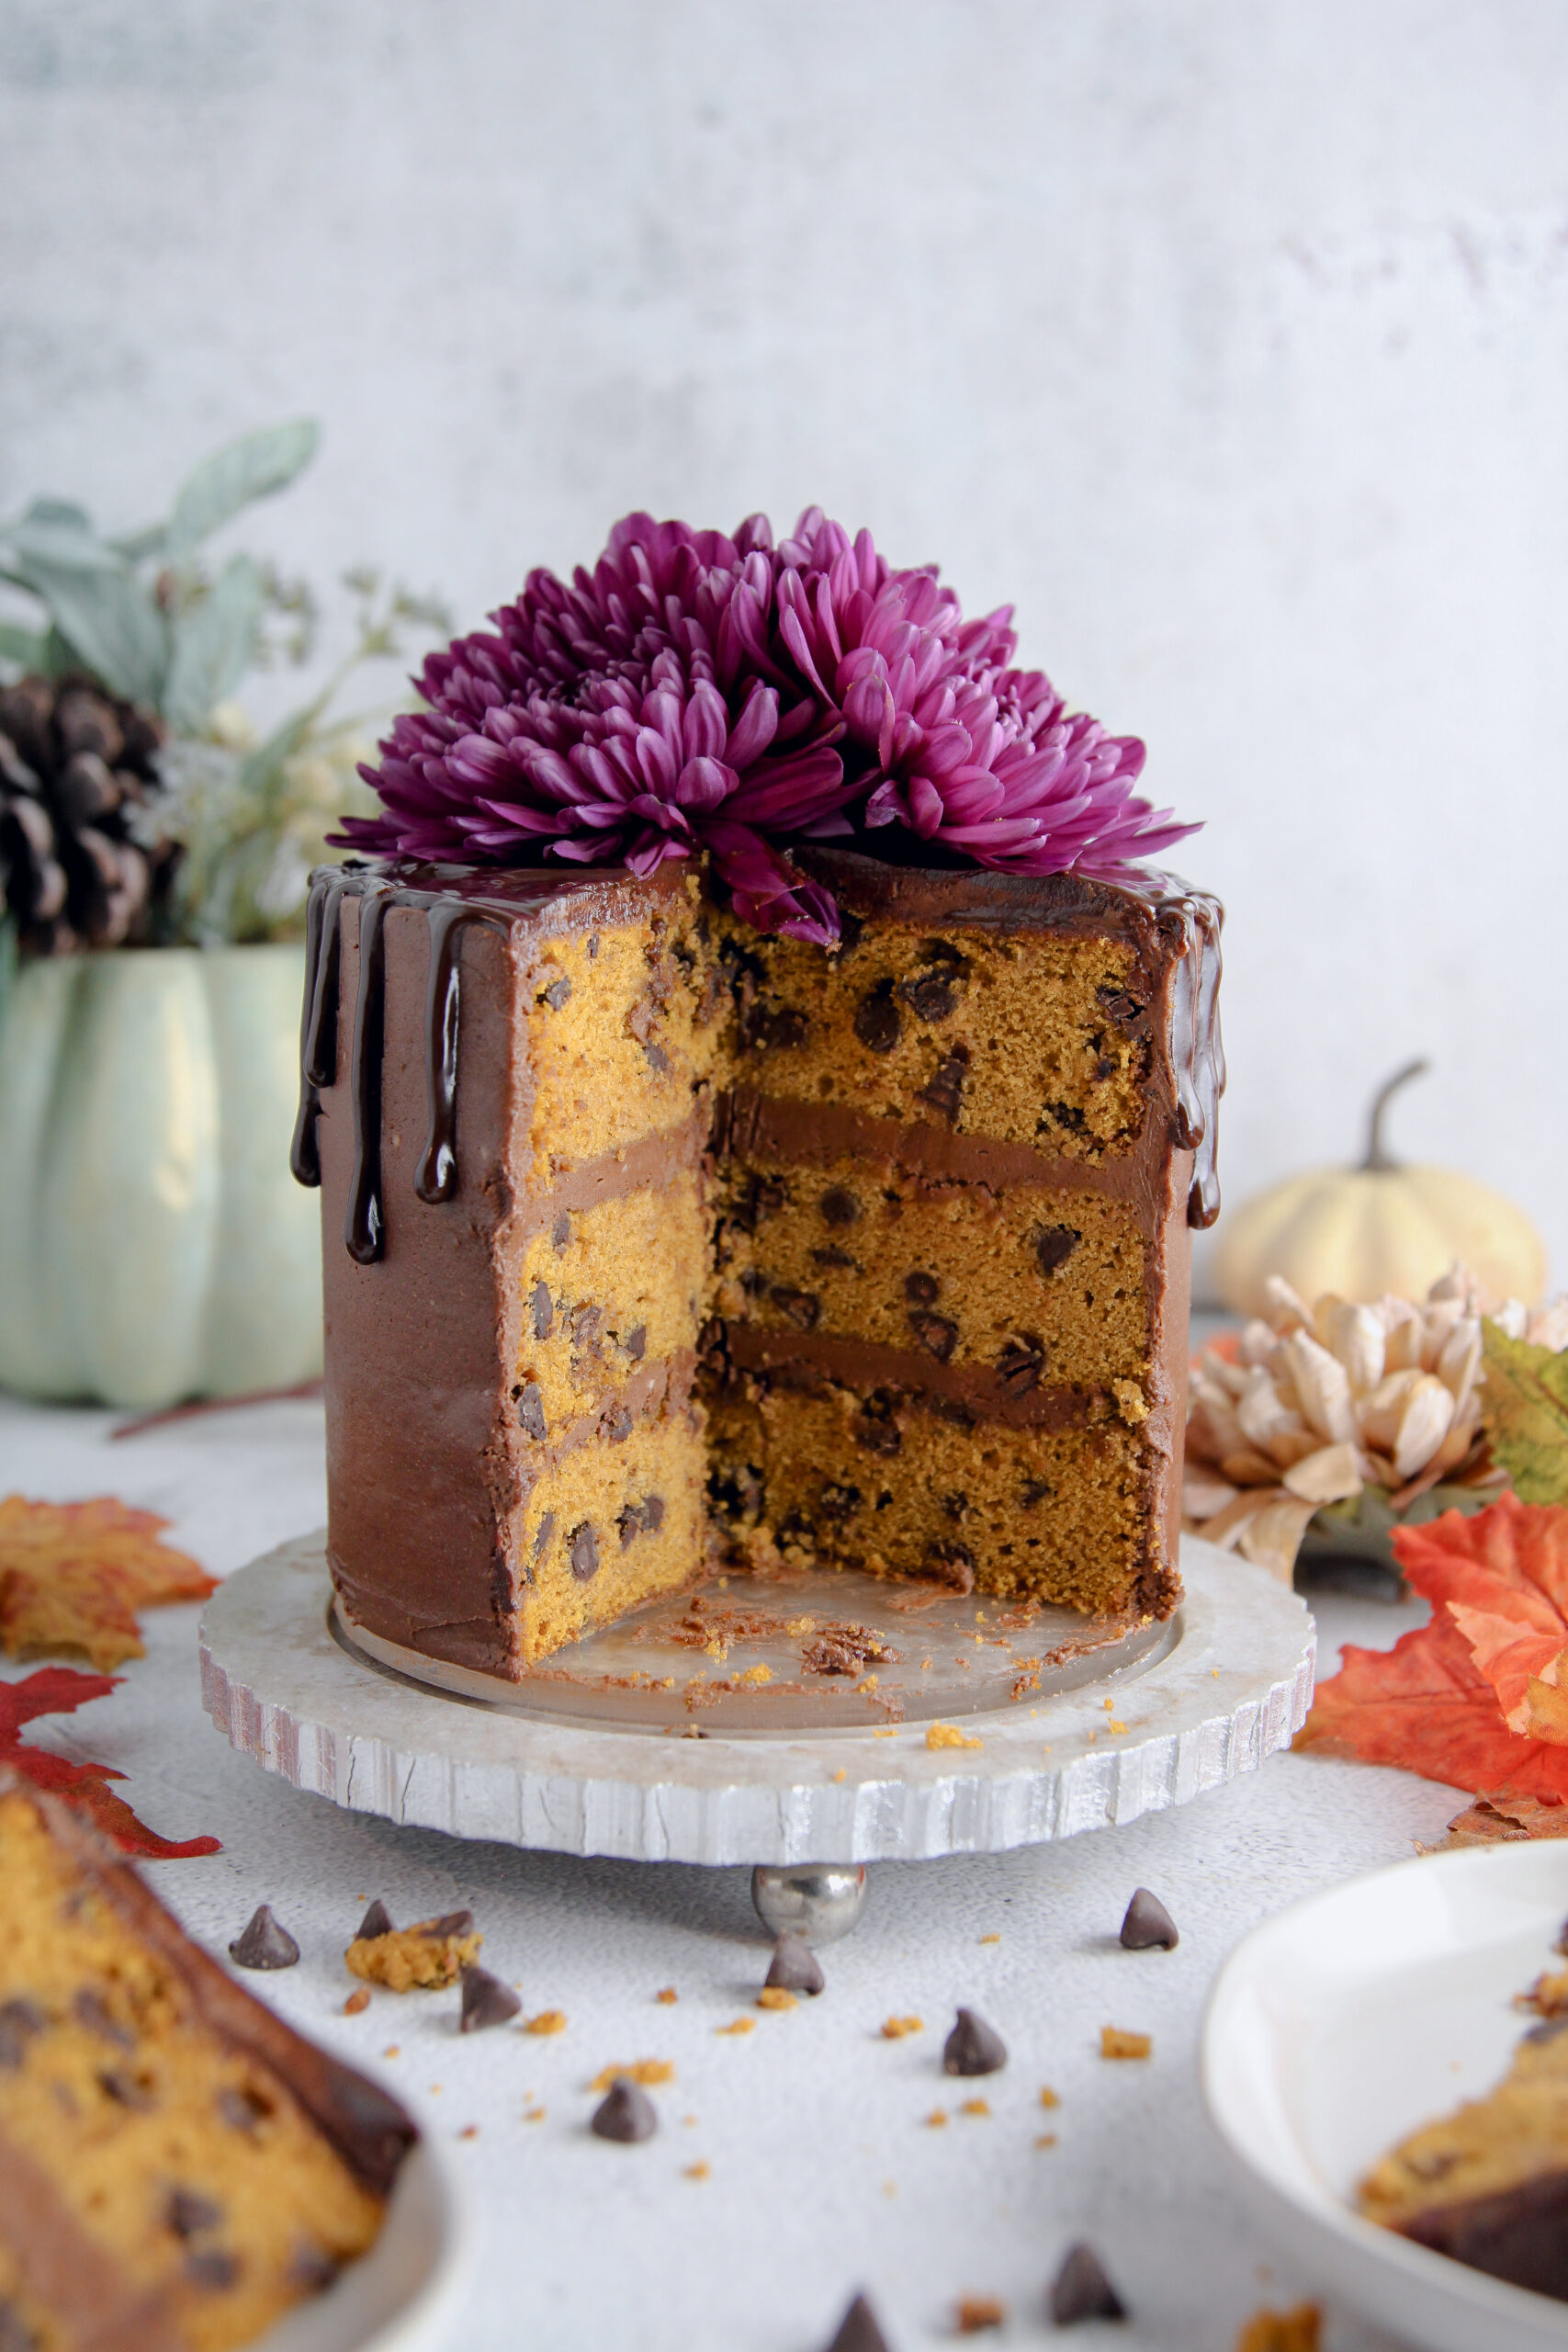 chocolate chip pumpkin layer cake topped with chocolate ganache and a purple flower